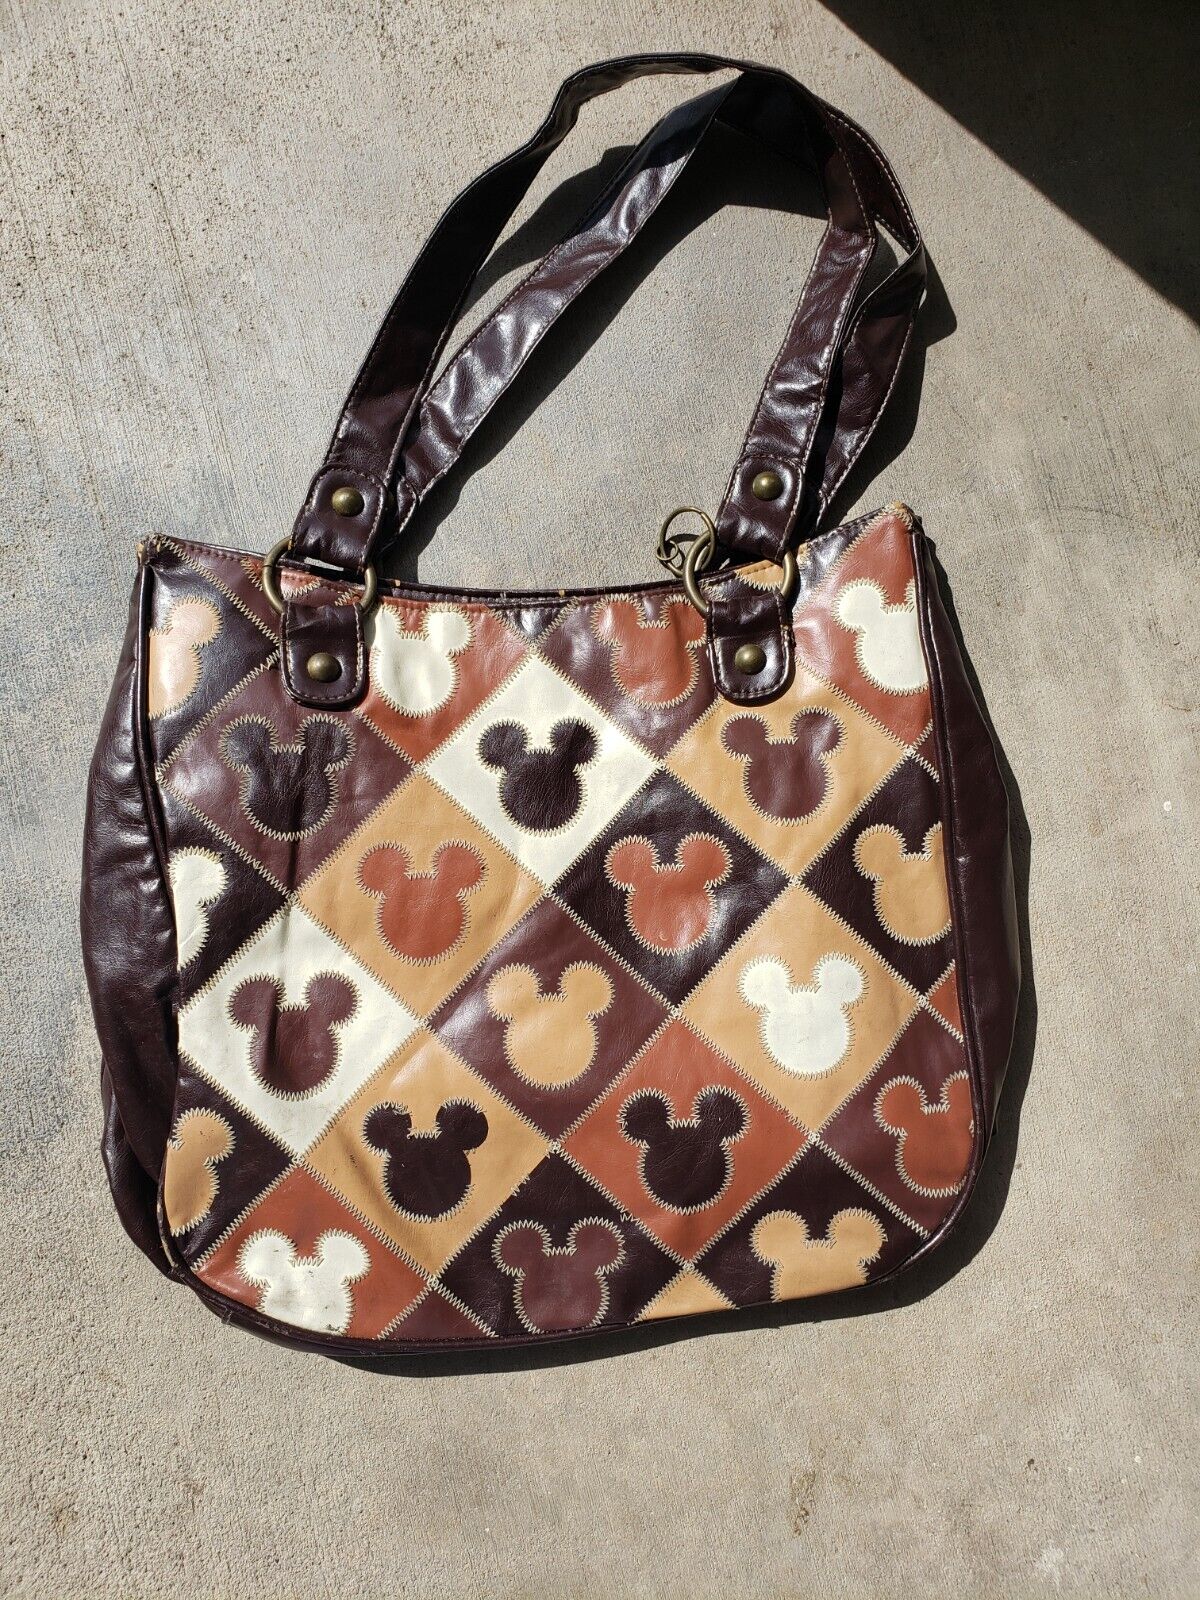 Disneyland Parks Mickey Mouse faux leather Brown Tan White Shoulder Purse Bag. 